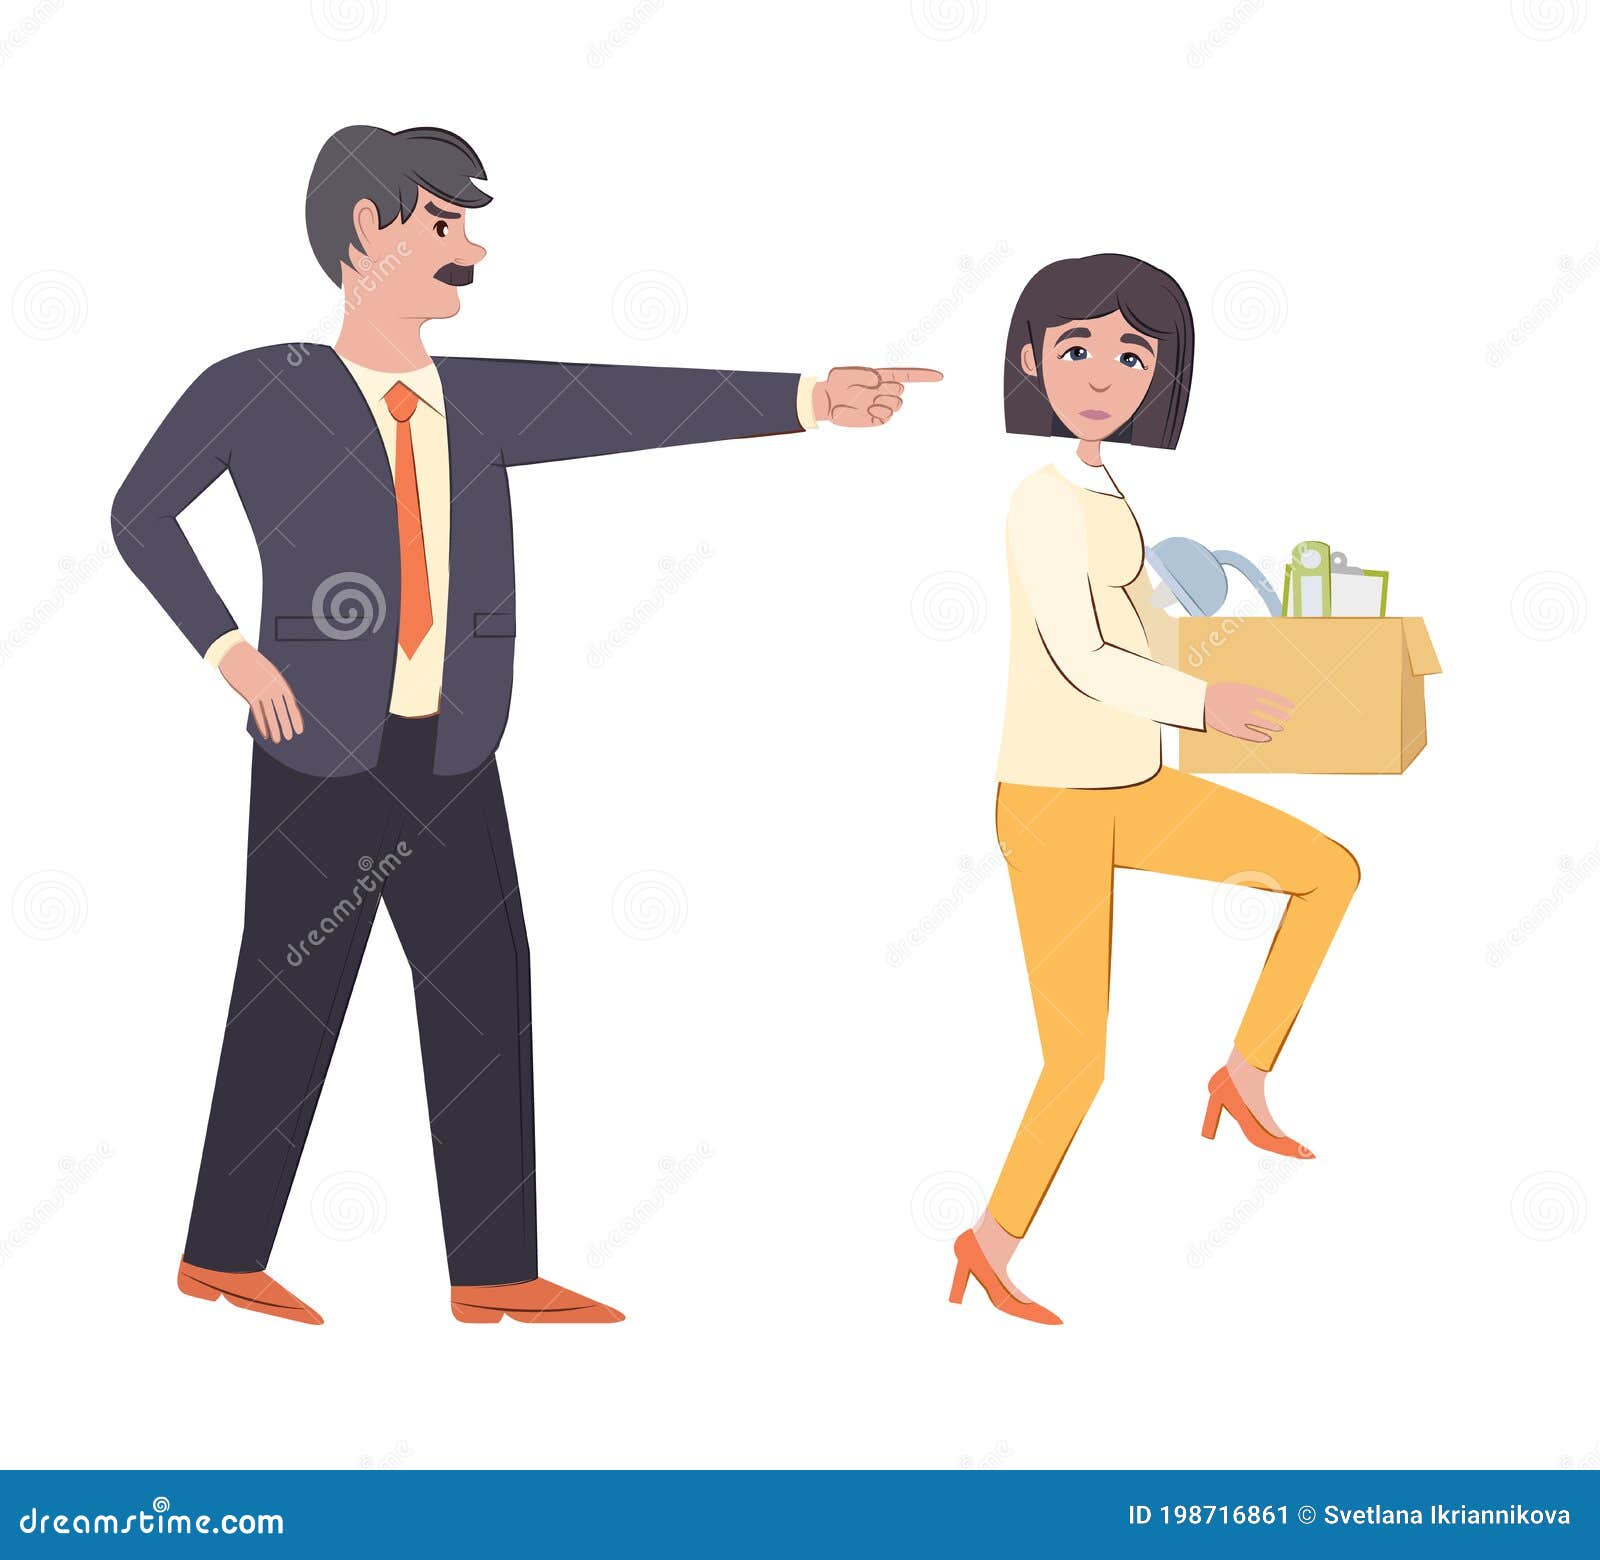 fired-woman-angry-man-boss-dismissal-girl-work-showing-incompetent-employee-door-leaves-workplace-holding-box-198716861.jpg